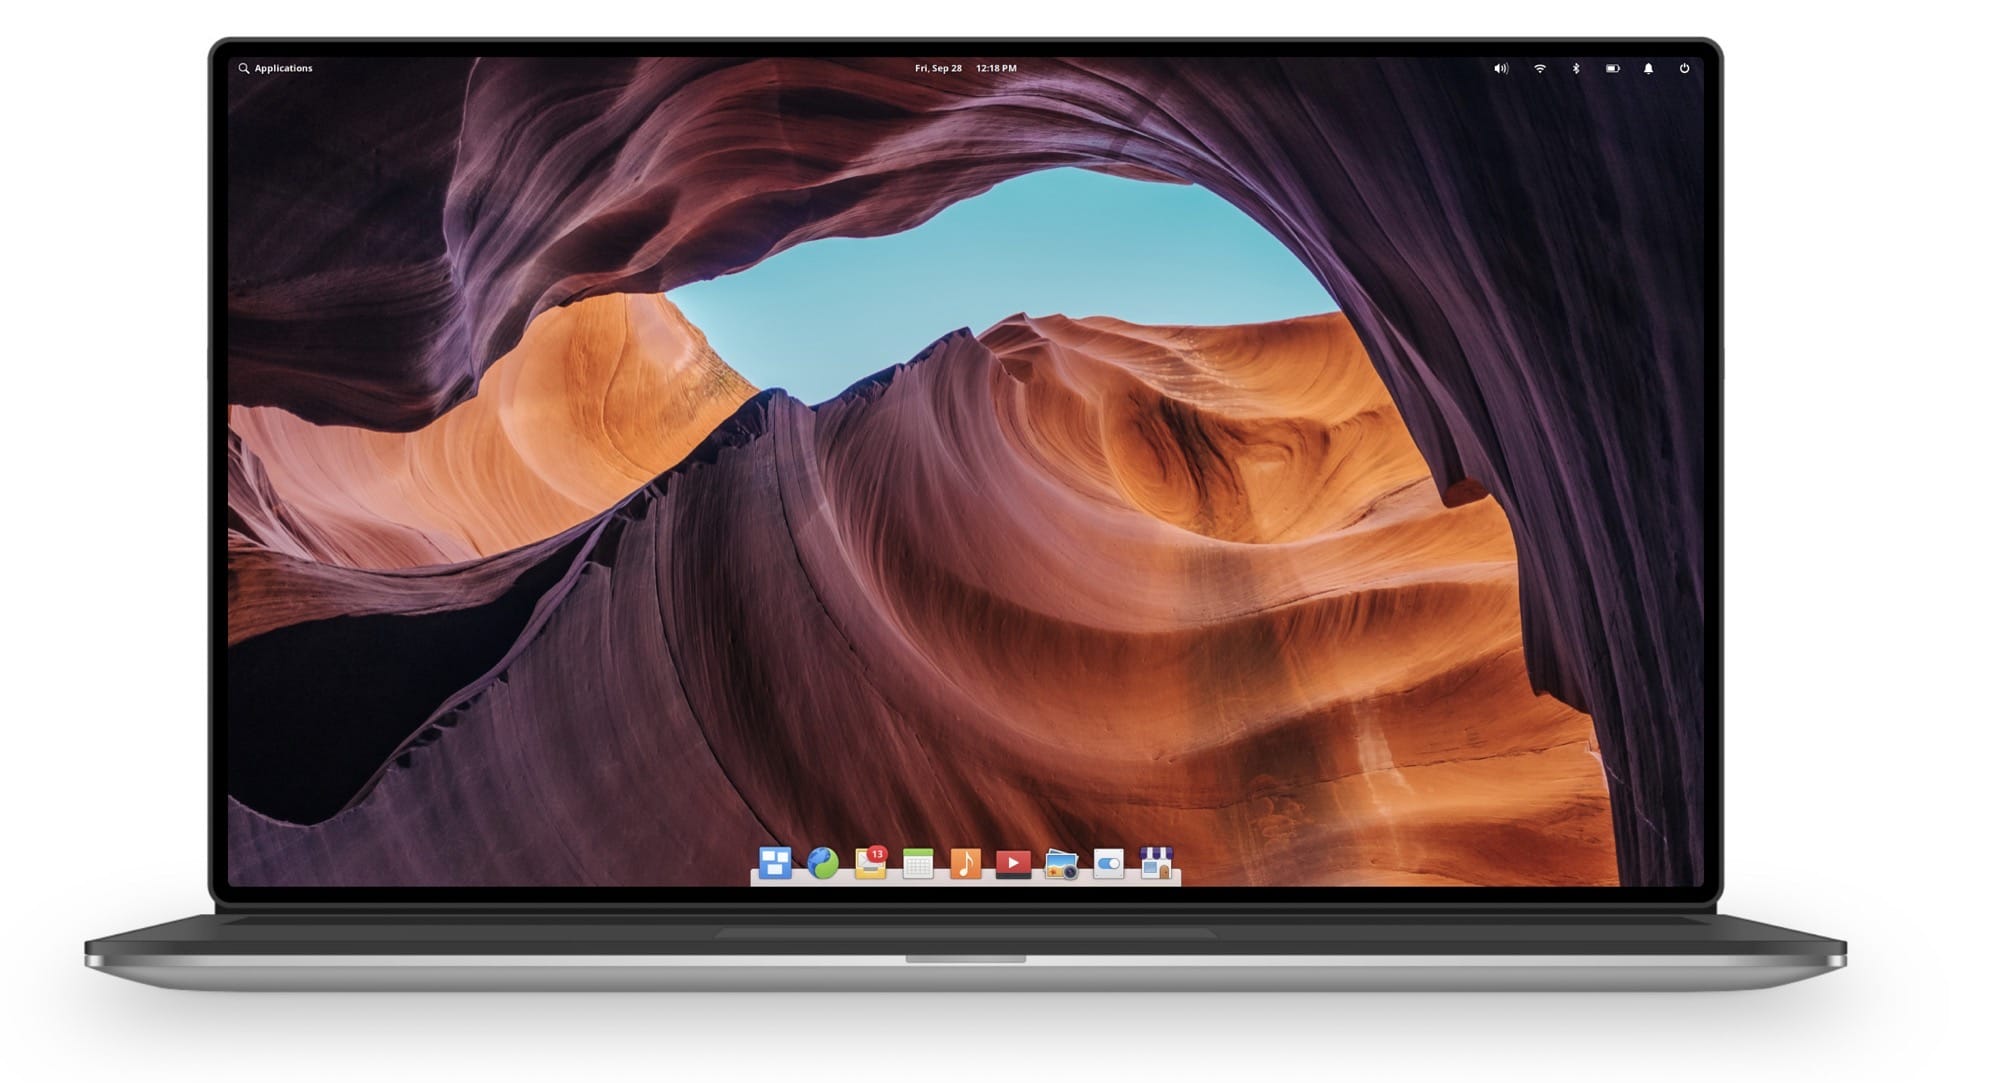 When it comes to MacBook alternatives, Linux is an option (and elementary OS looks pretty sweet).